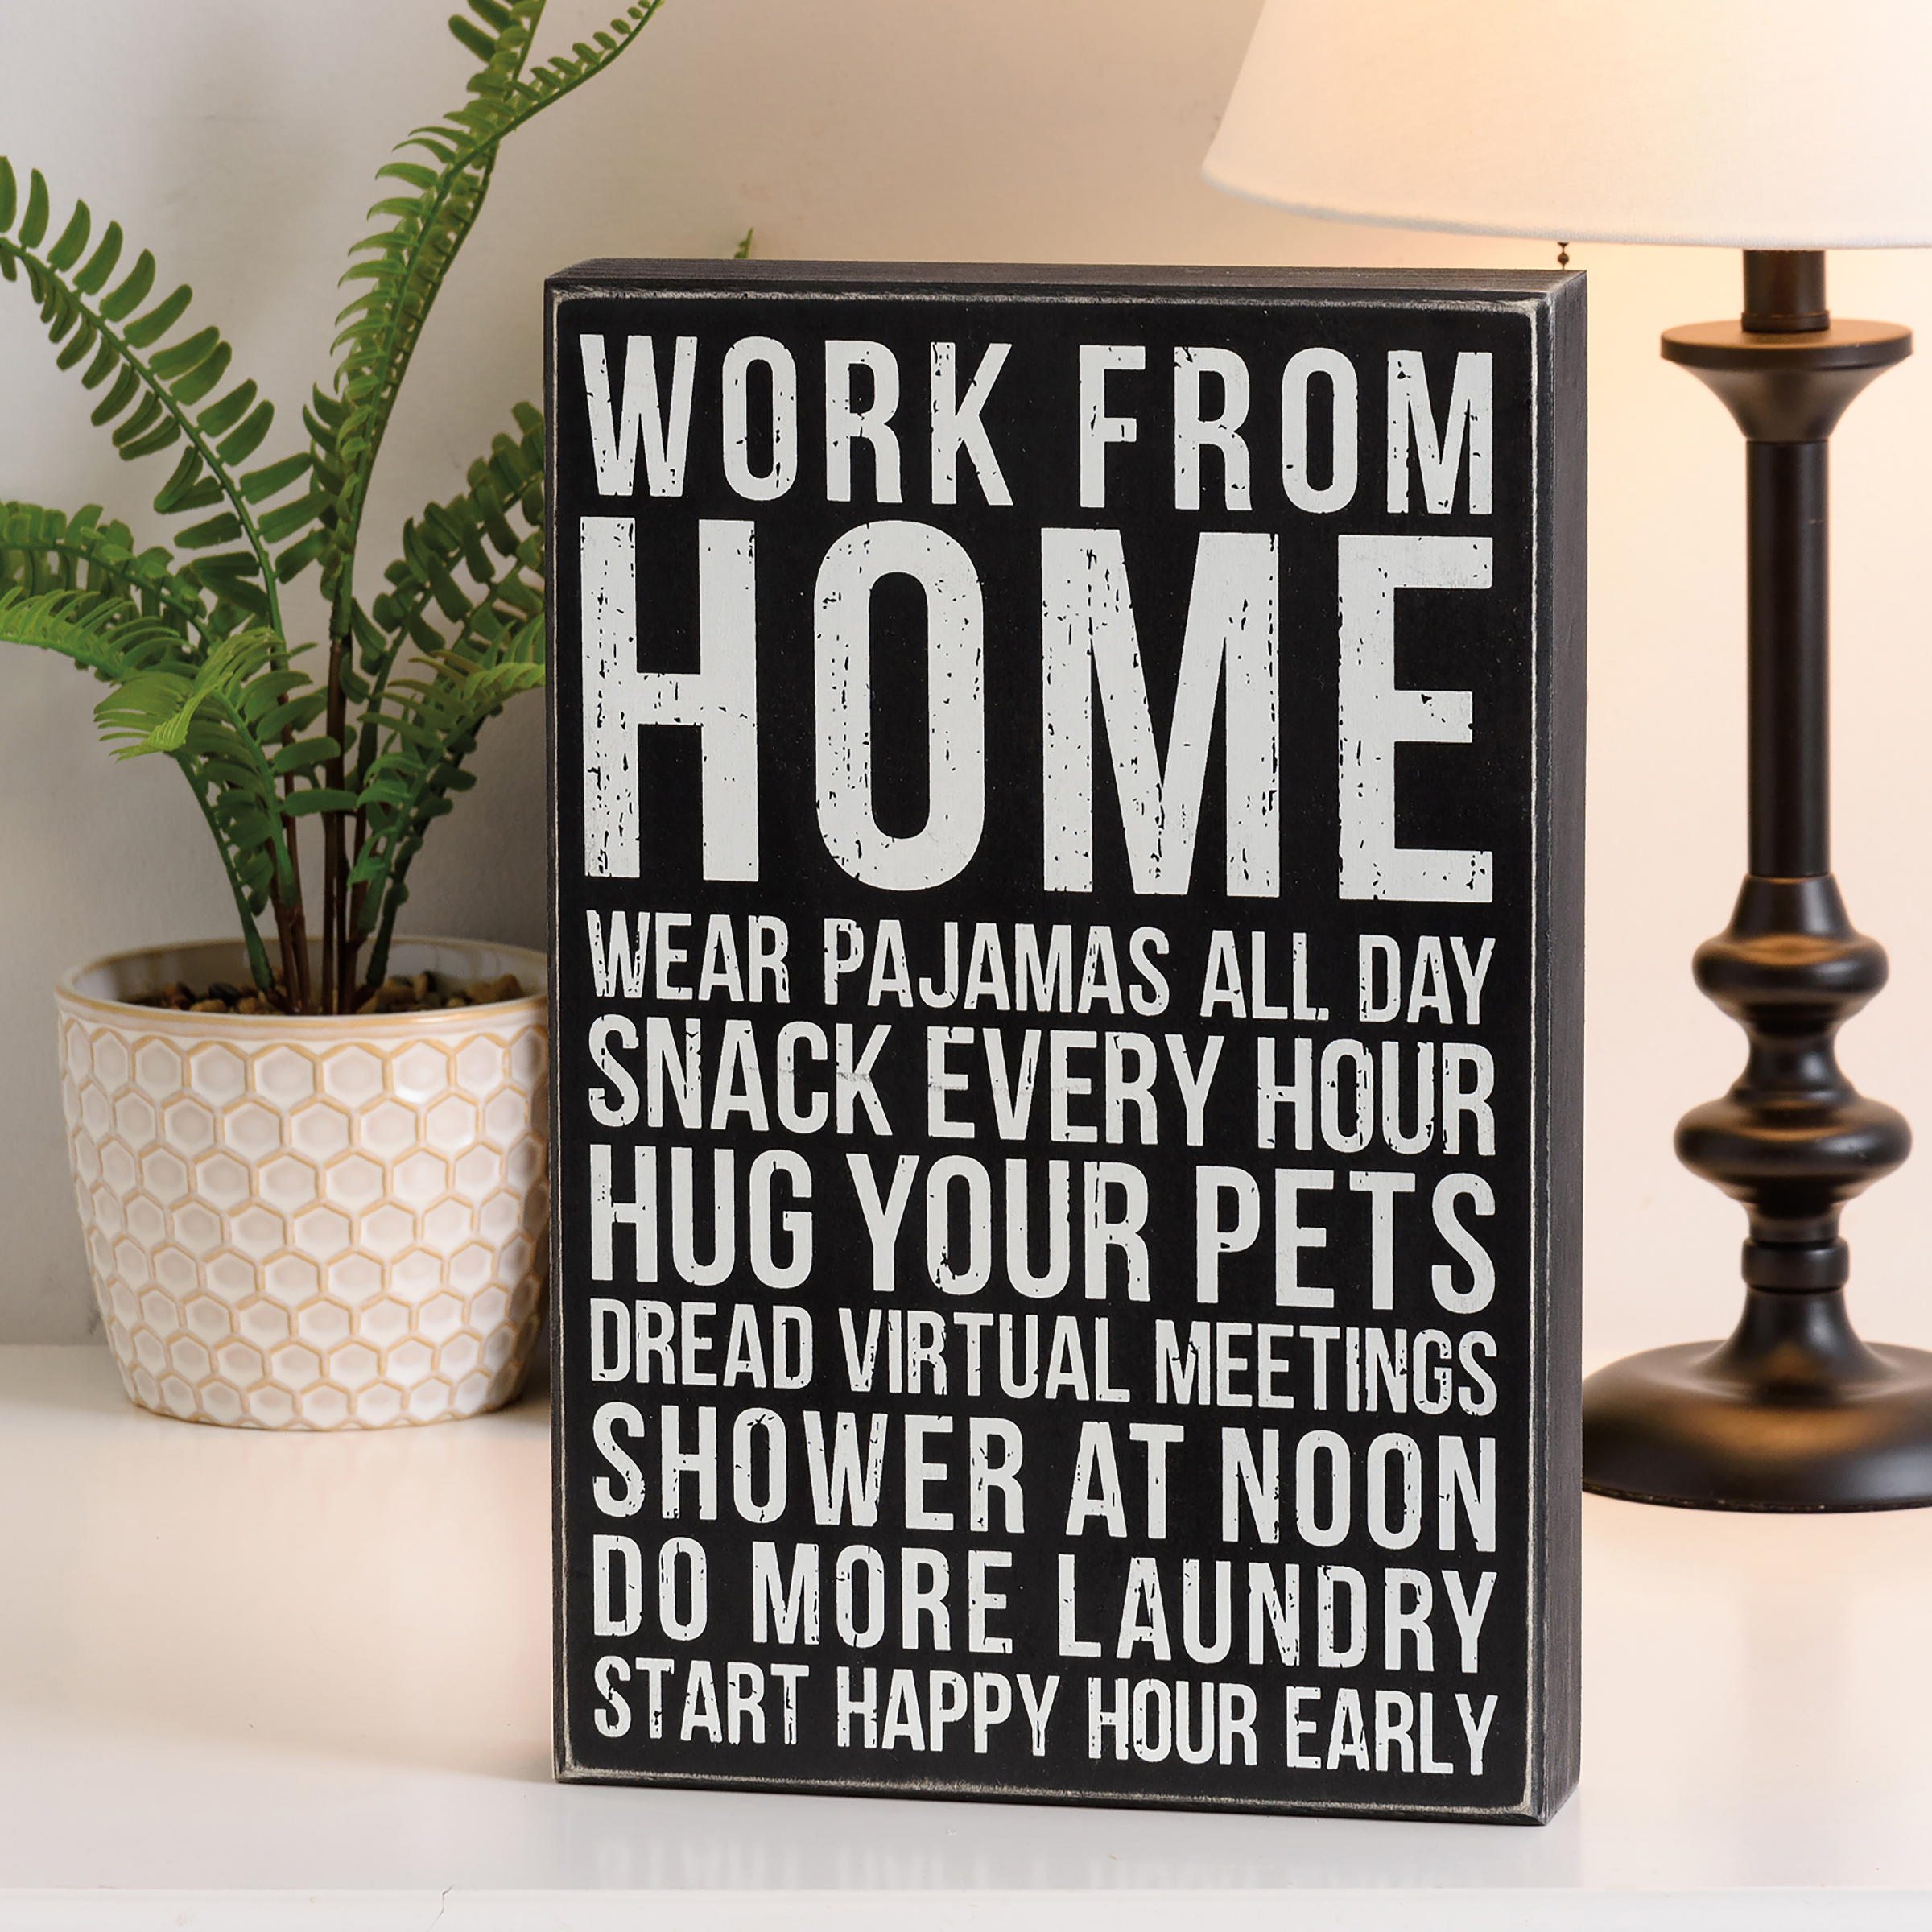 Work From Home Must Haves I Use Every Single Day - All for the